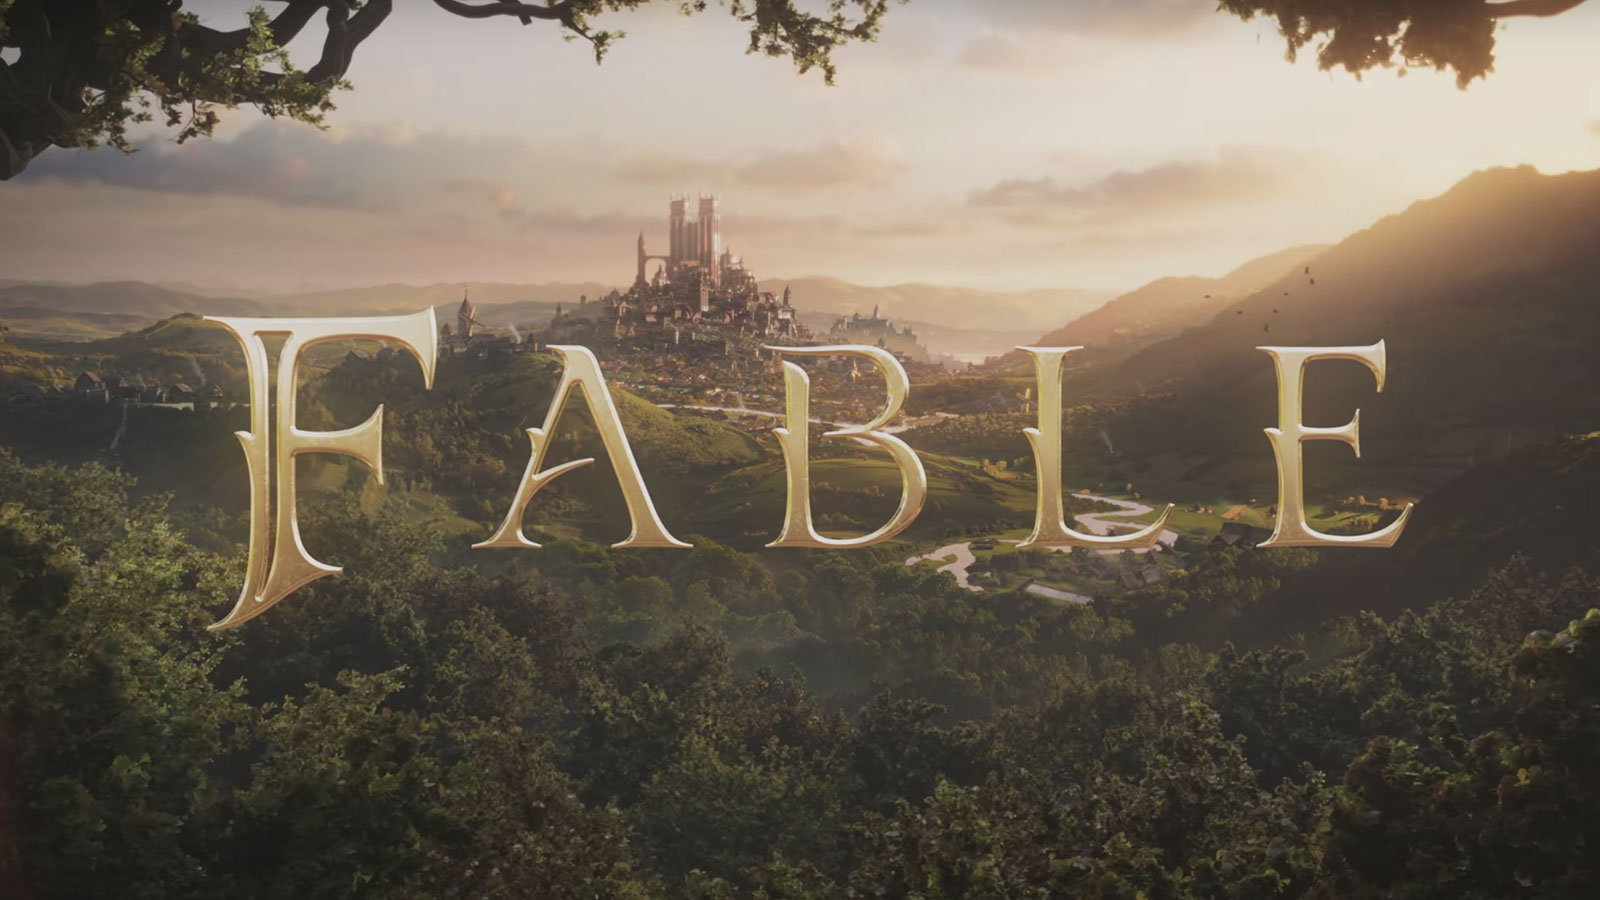 ‘Fable’ Announces Revival Of The Fantasy Franchise With New Trailer